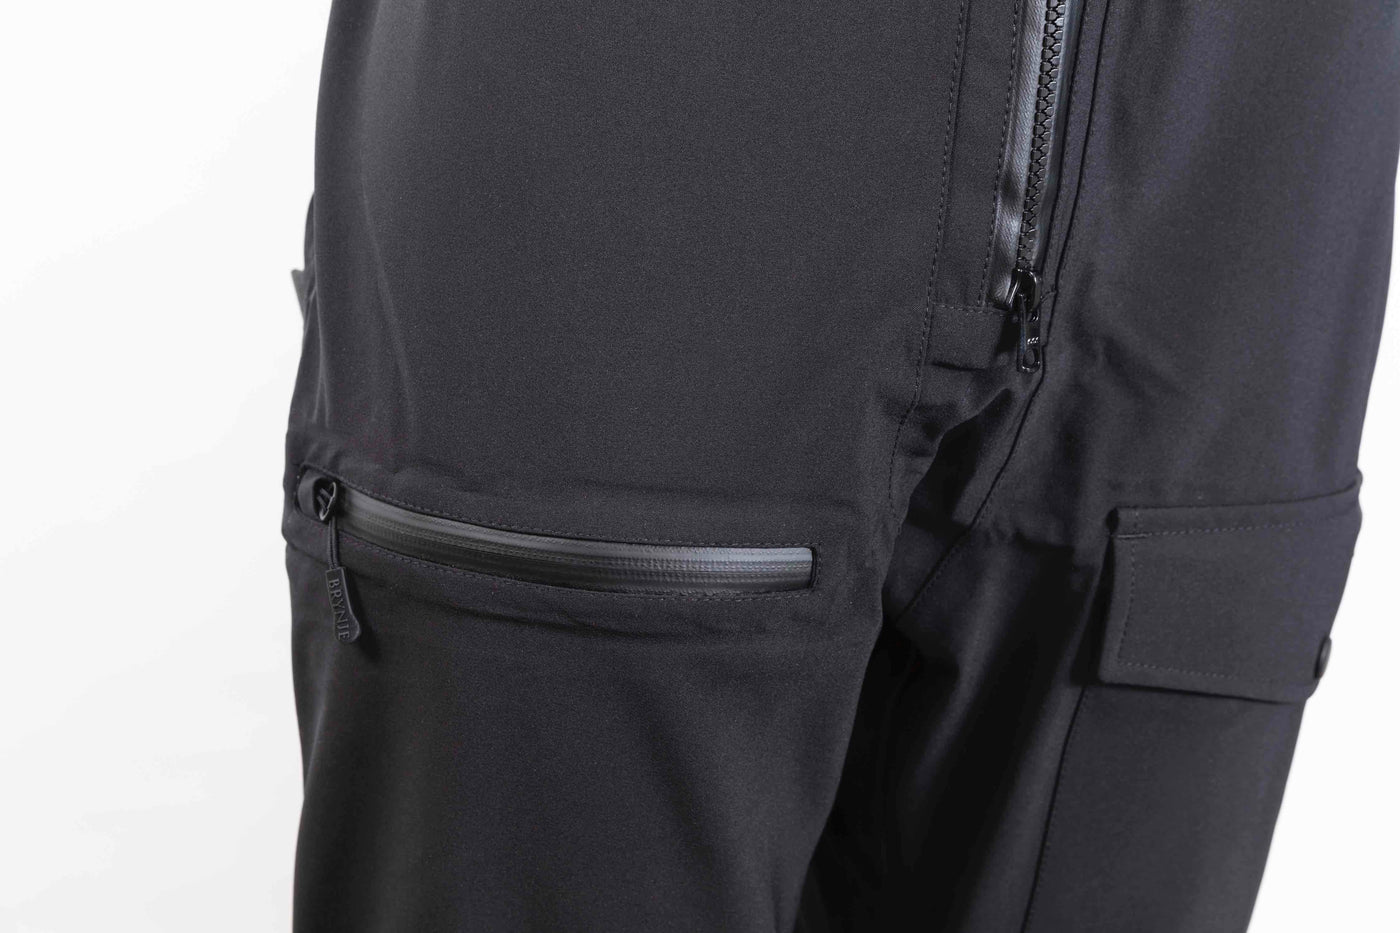 Brynje Expedition Pants